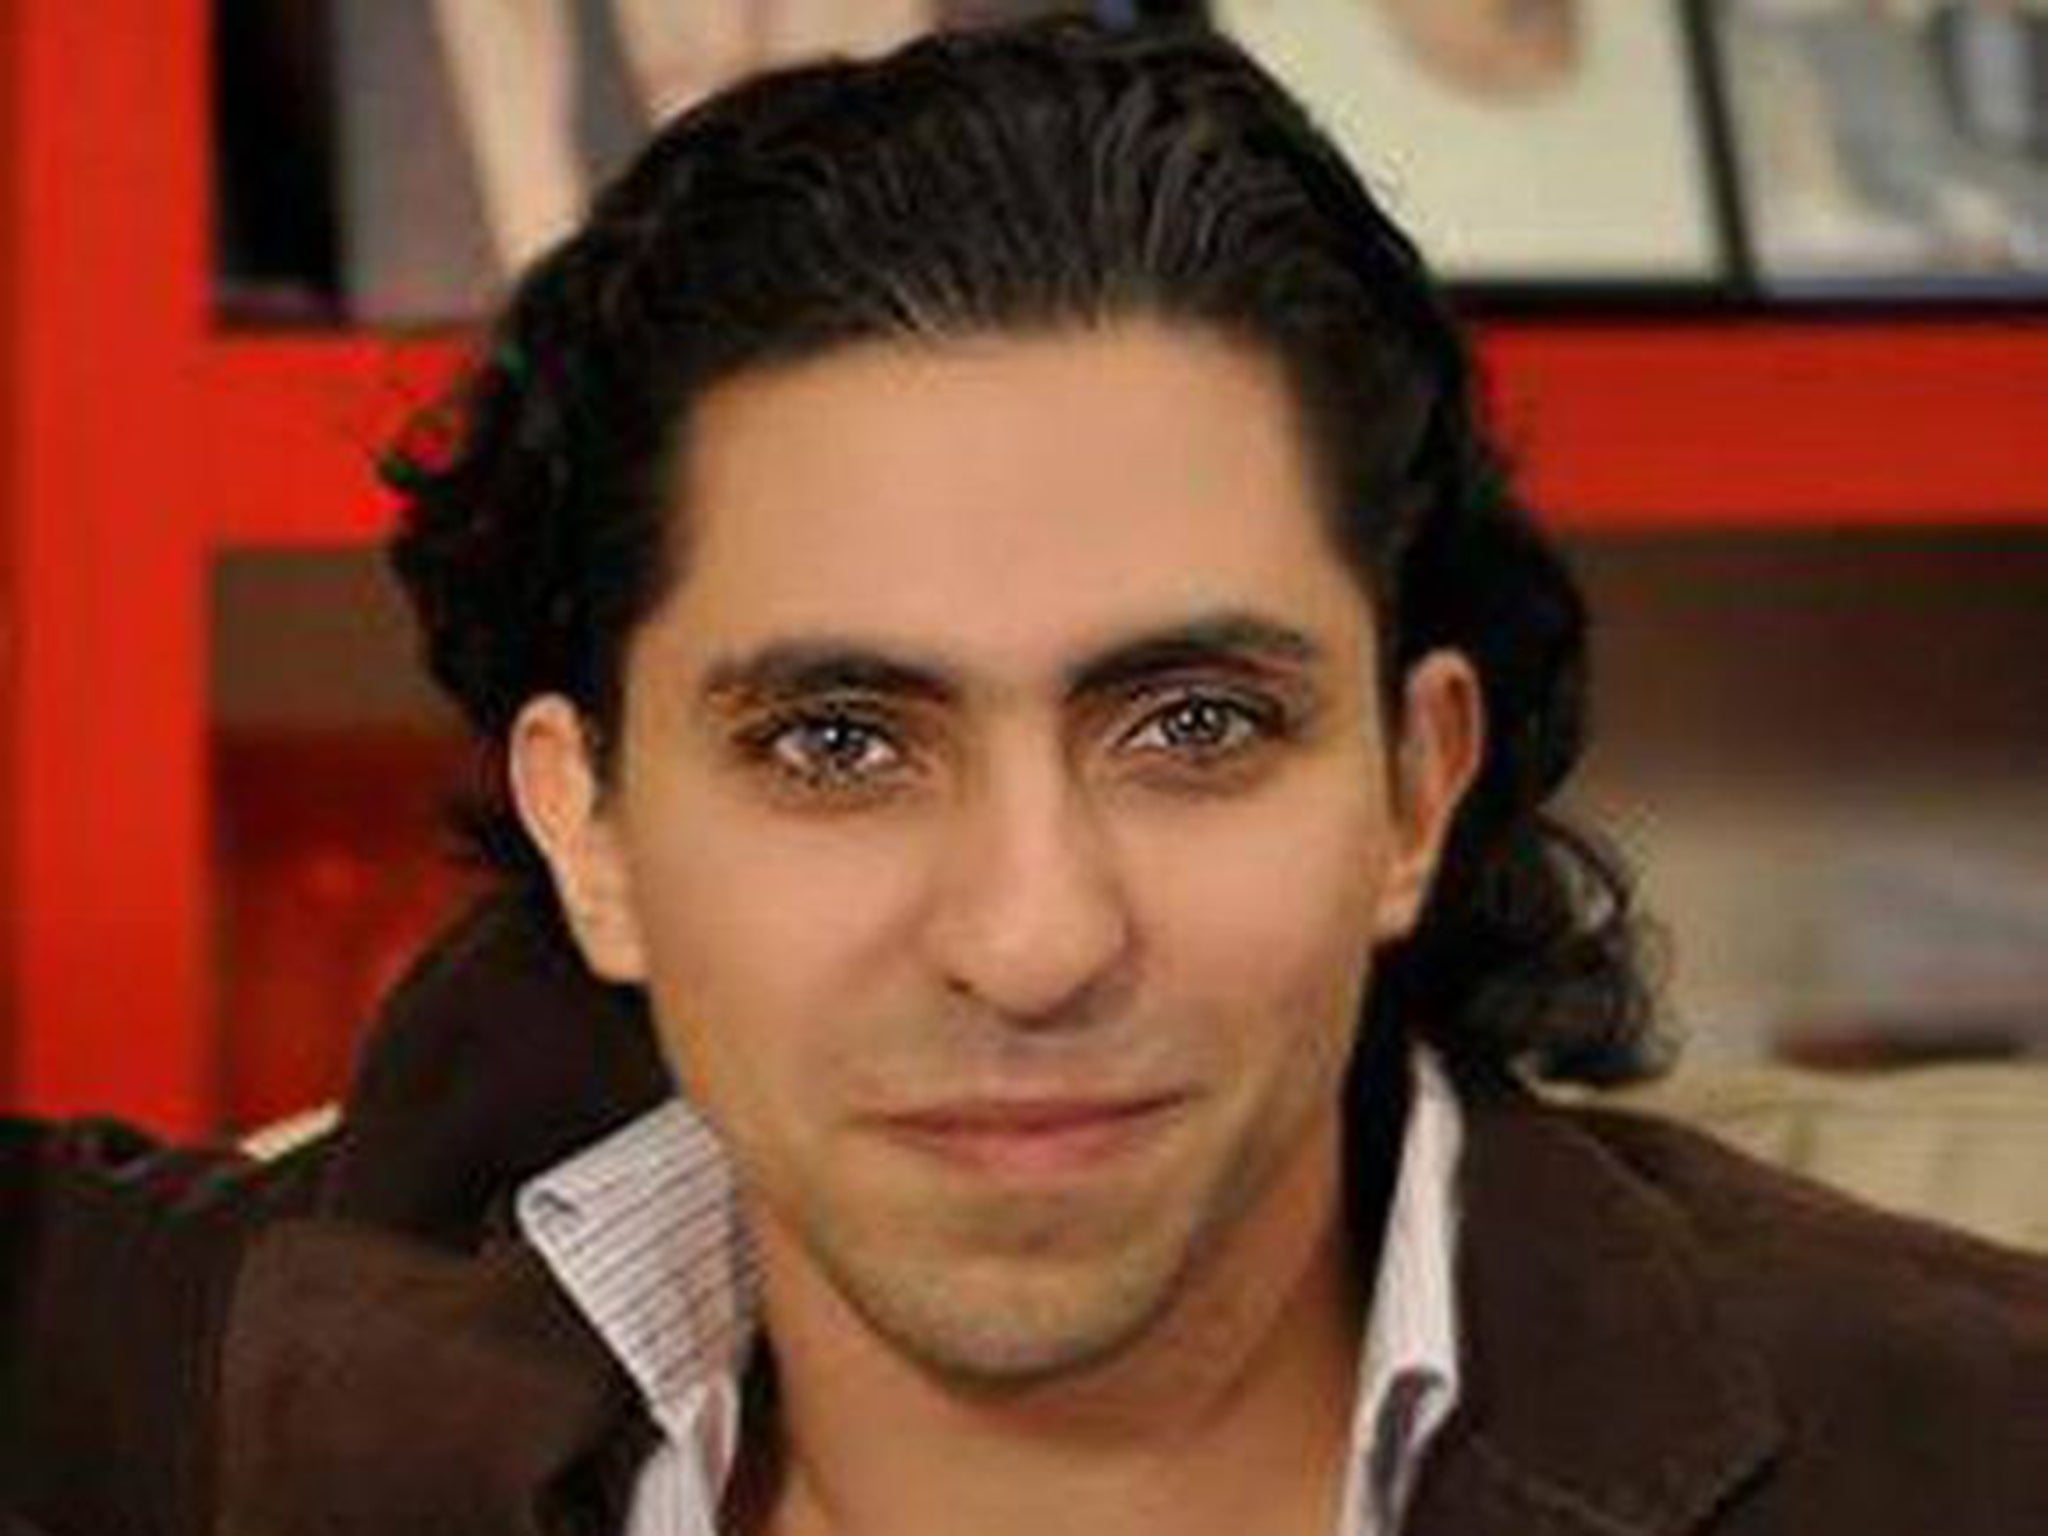 Raif Badawi was convicted of cybercrime and insulting Islam after co-founding the now banned website Free Saudi Liberals